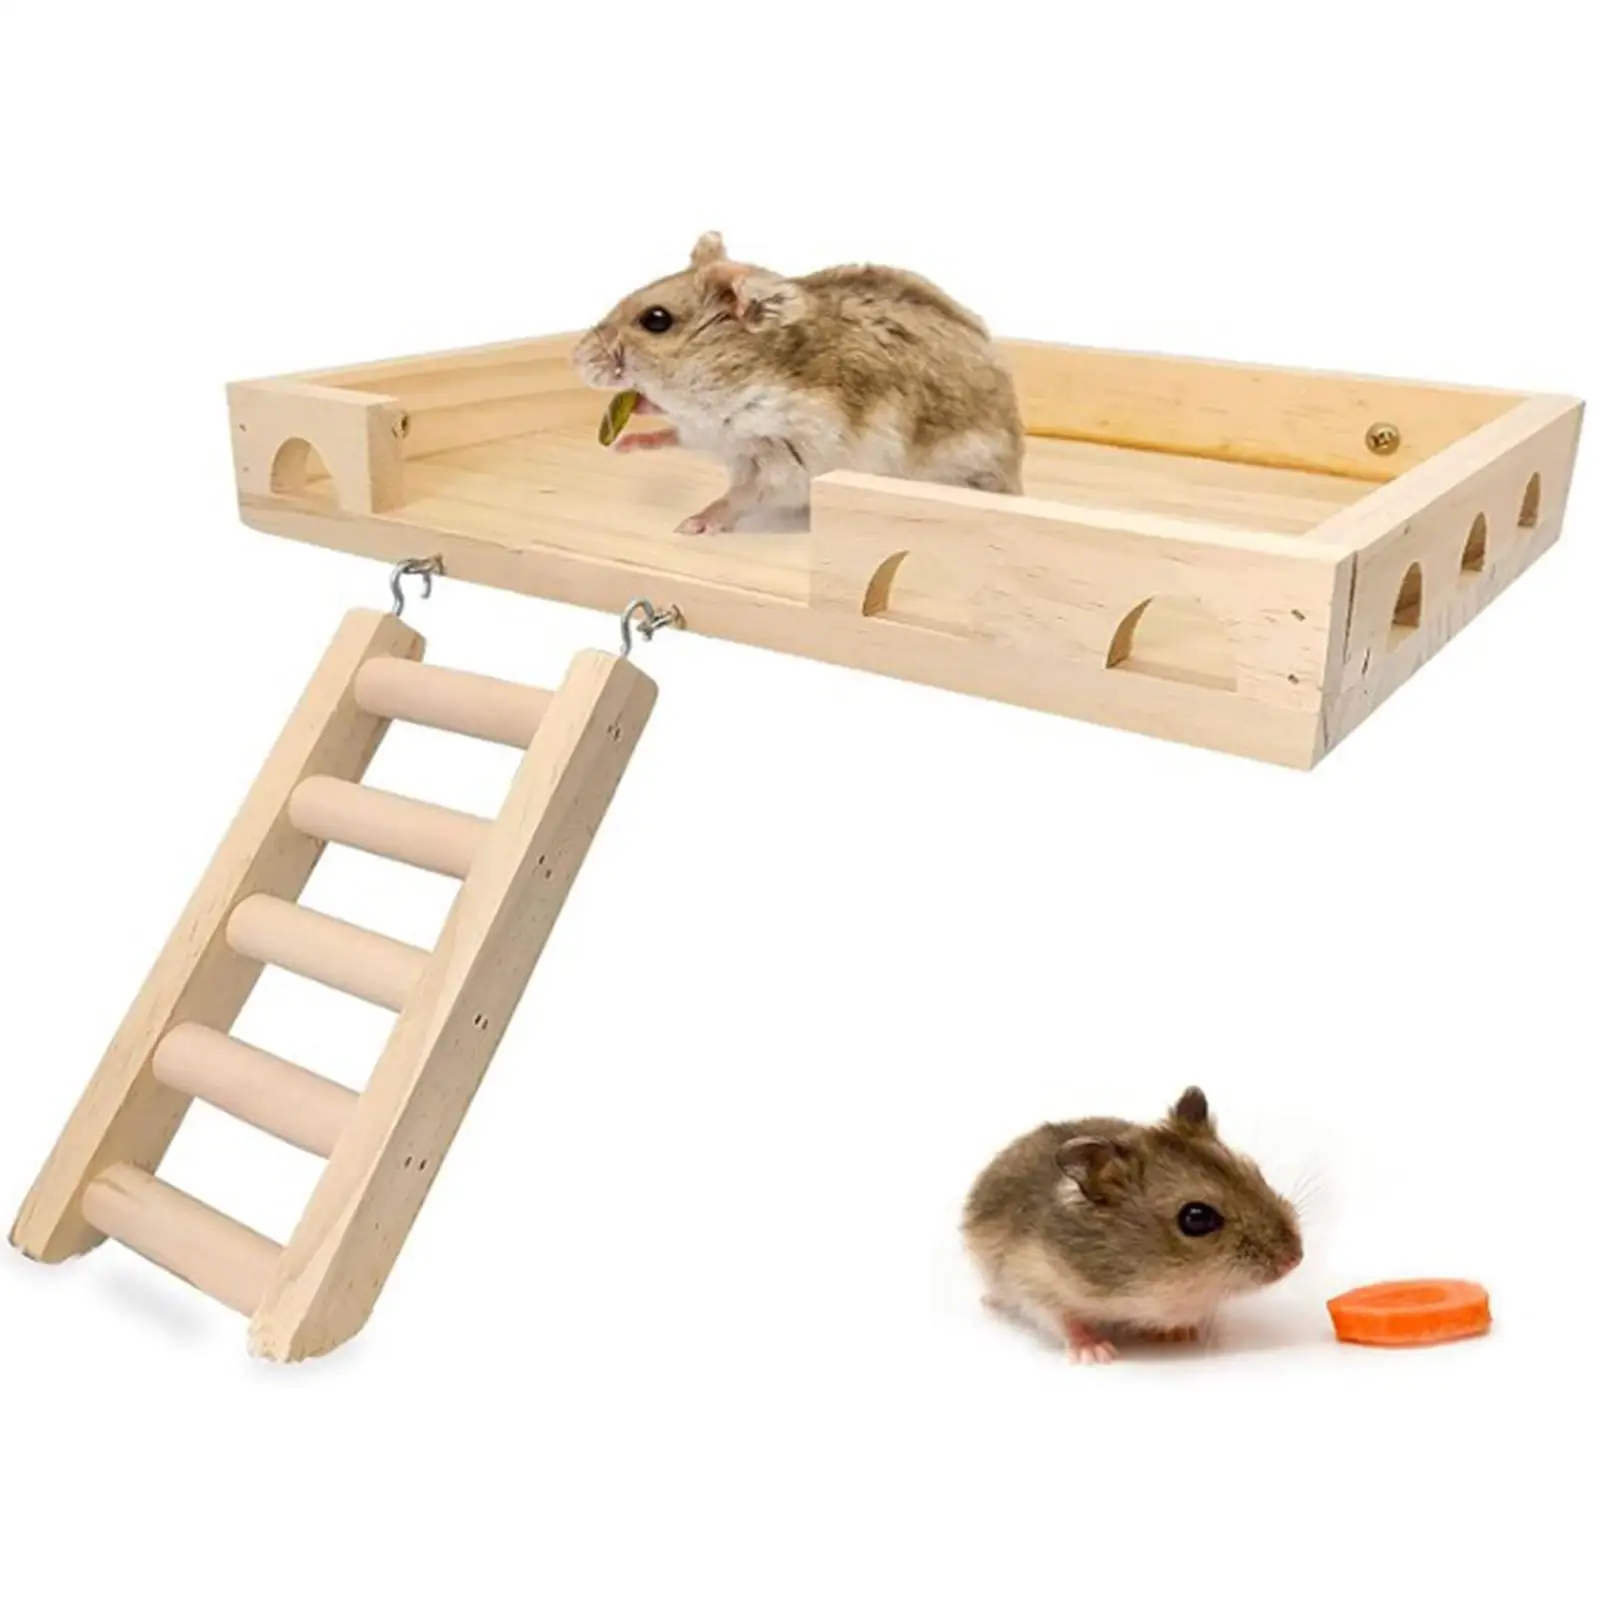 Hamster Wooden Ladder Toy Pet Bird Parrot Playground Chewing Toy Sturdy Durable Simple Installation Accessory Wooden Ladder Toy